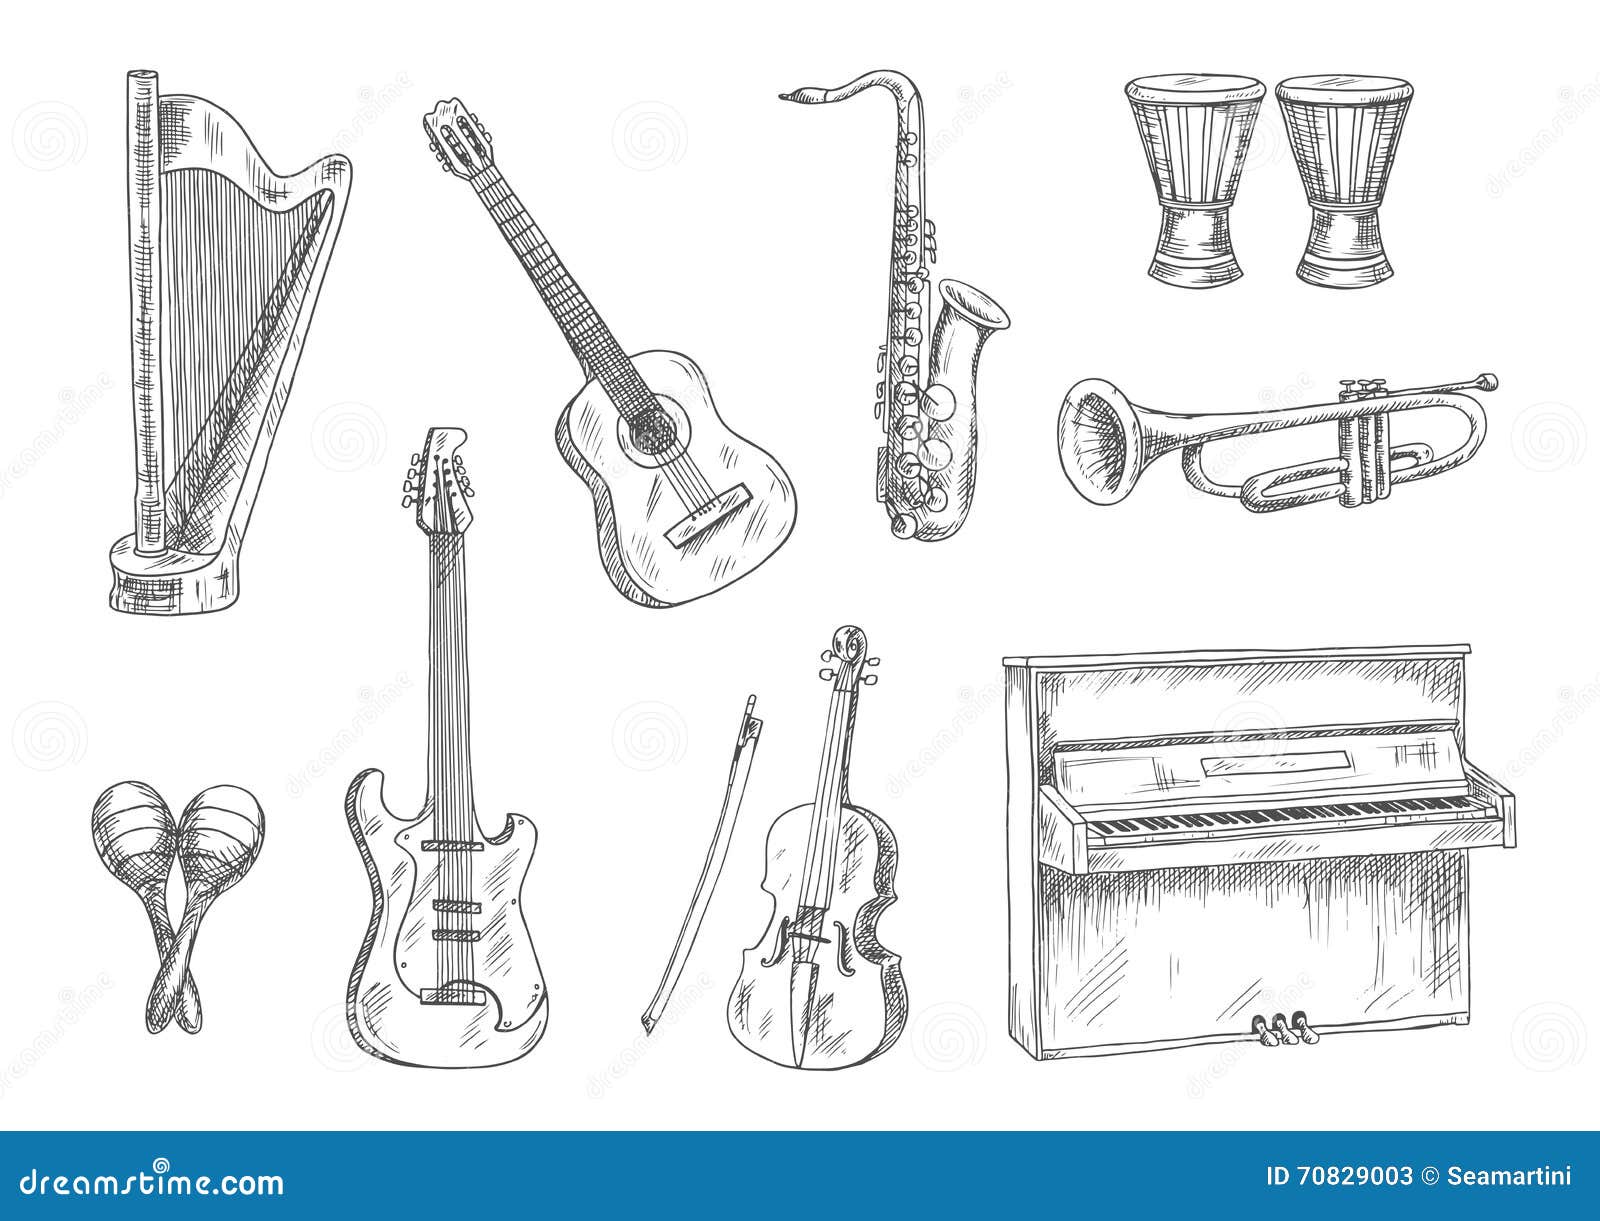 How to Draw Drum, Musical Instruments-vachngandaiphat.com.vn